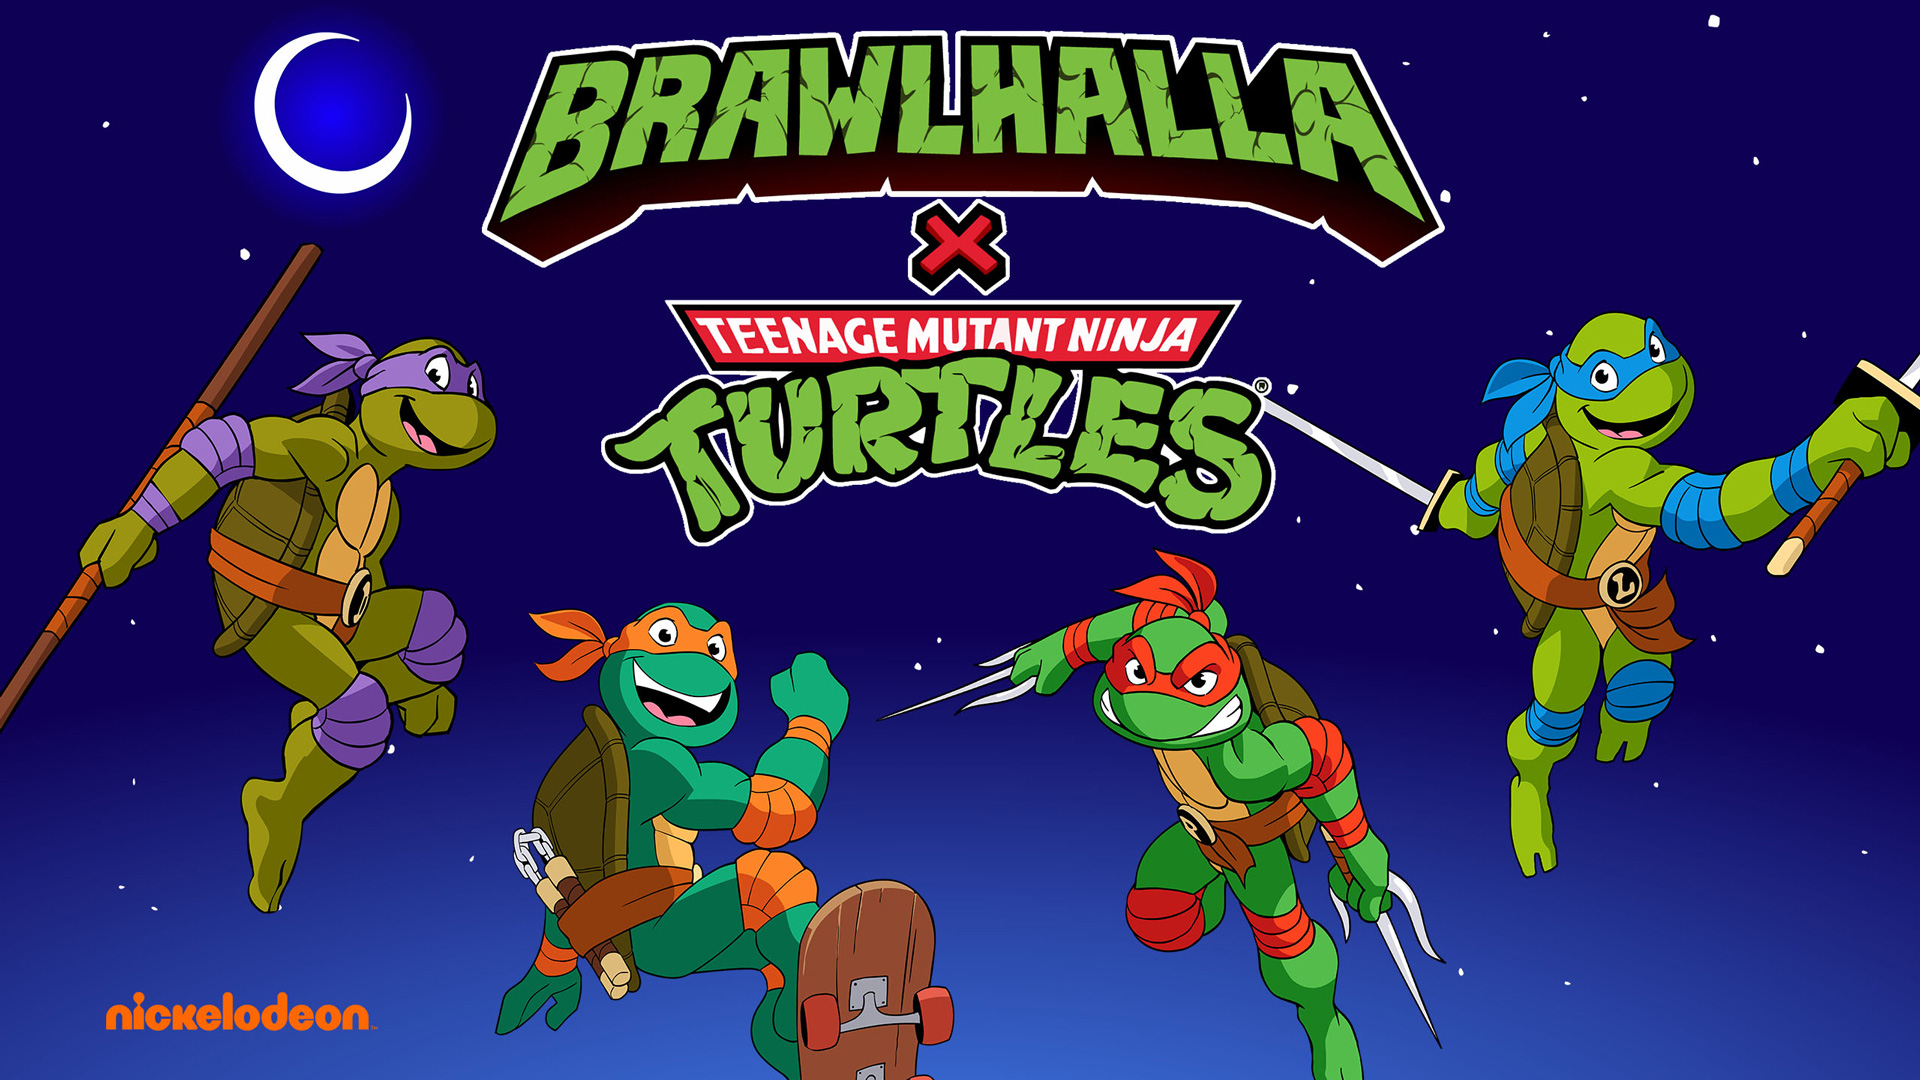 Brawlhalla on get the action started by equipping these turtle